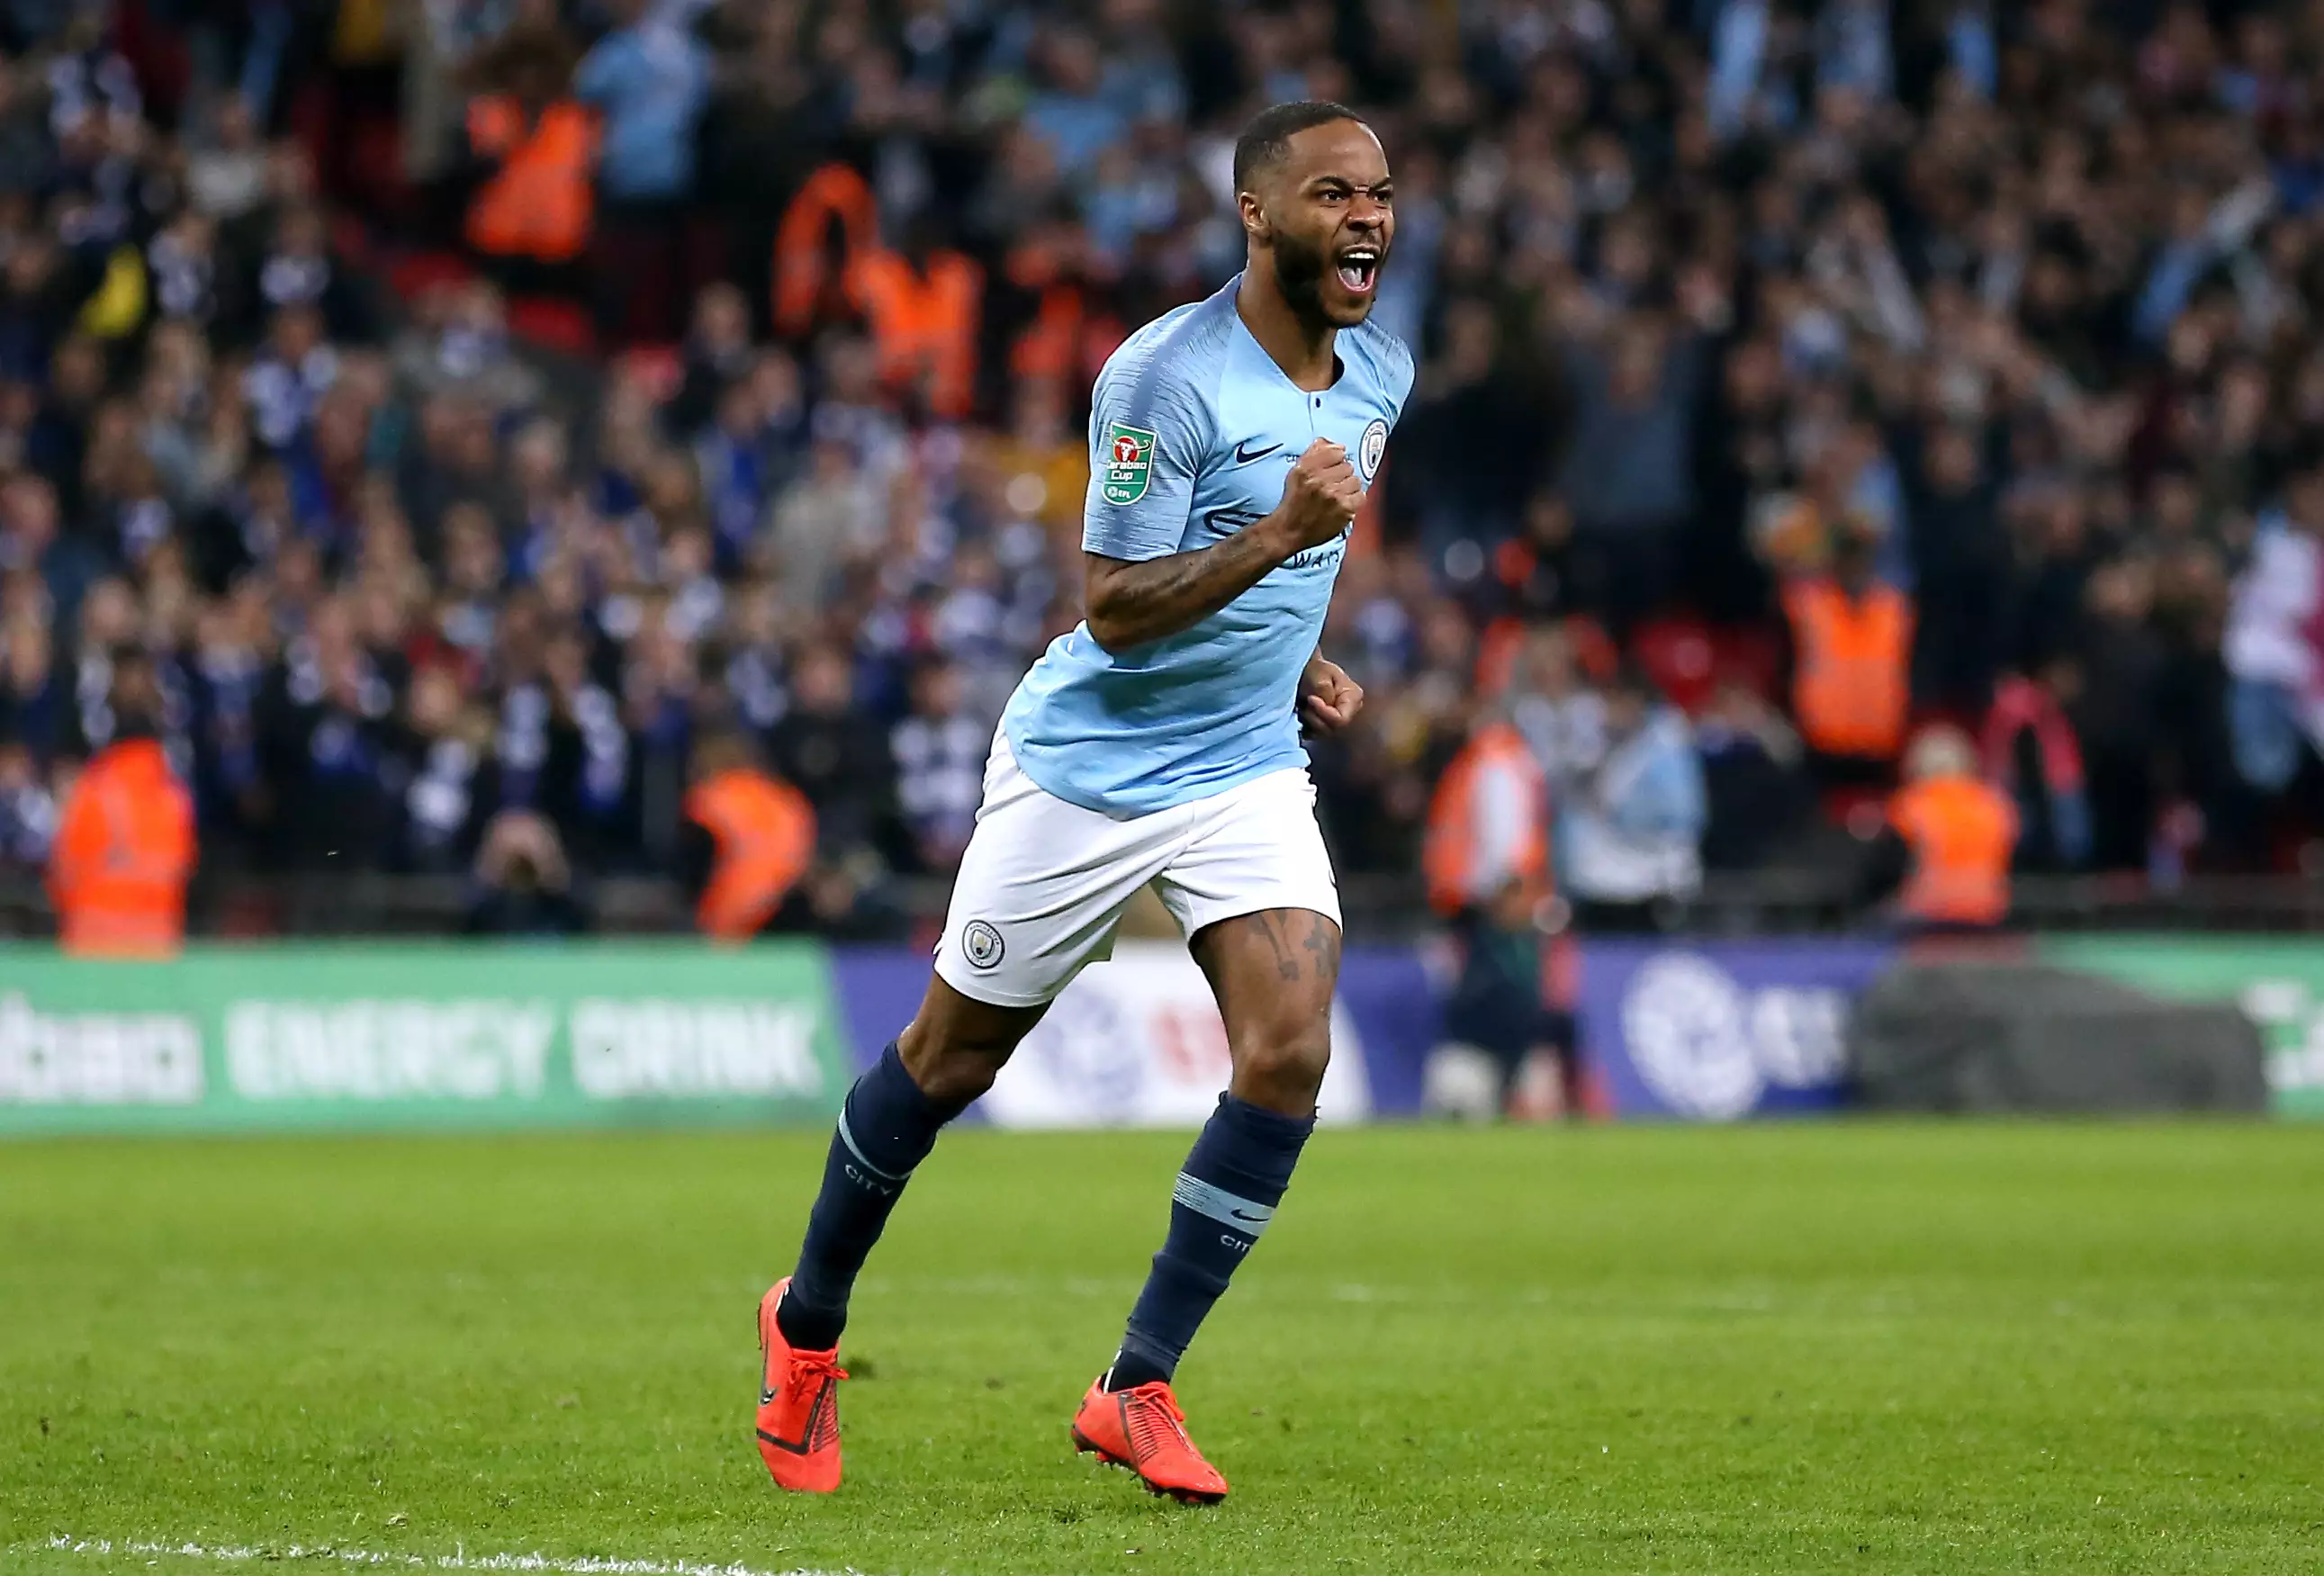 Sterling's been in brilliant form this season. Image: PA Images